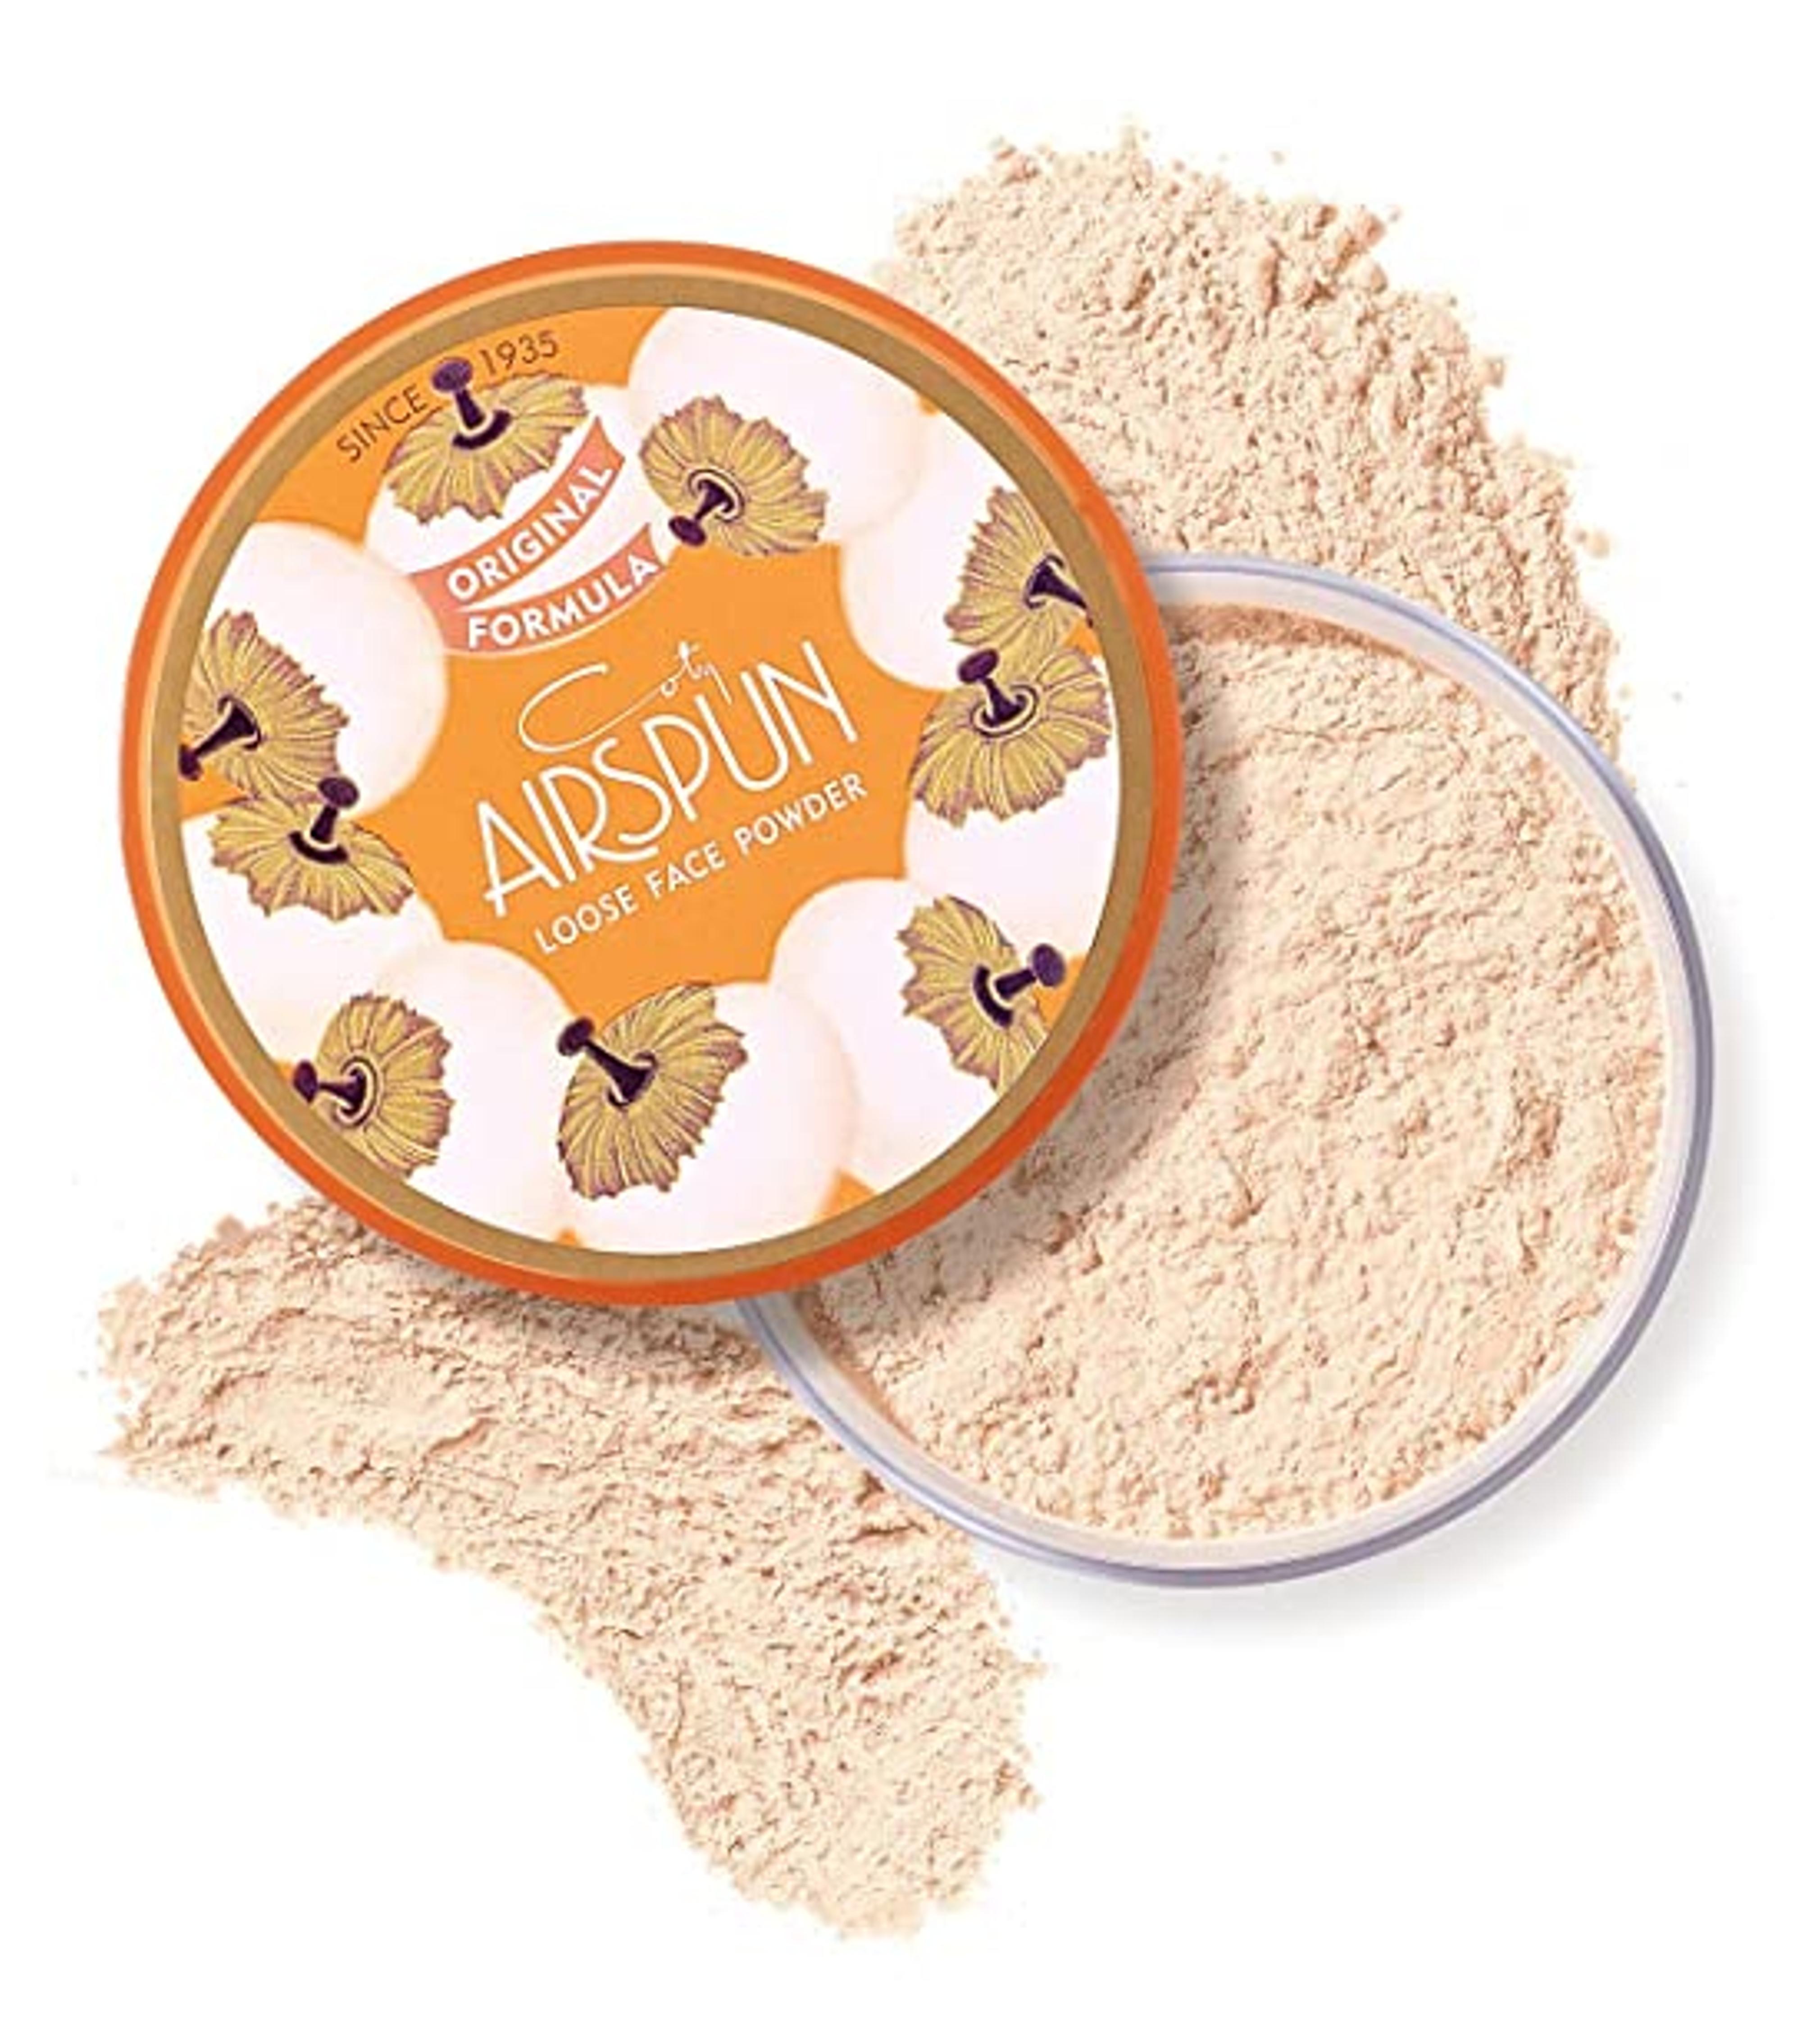 Amazon.com : Coty Airspun Loose Face Powder, Translucent, Pack of 1 : Beauty & Personal Care